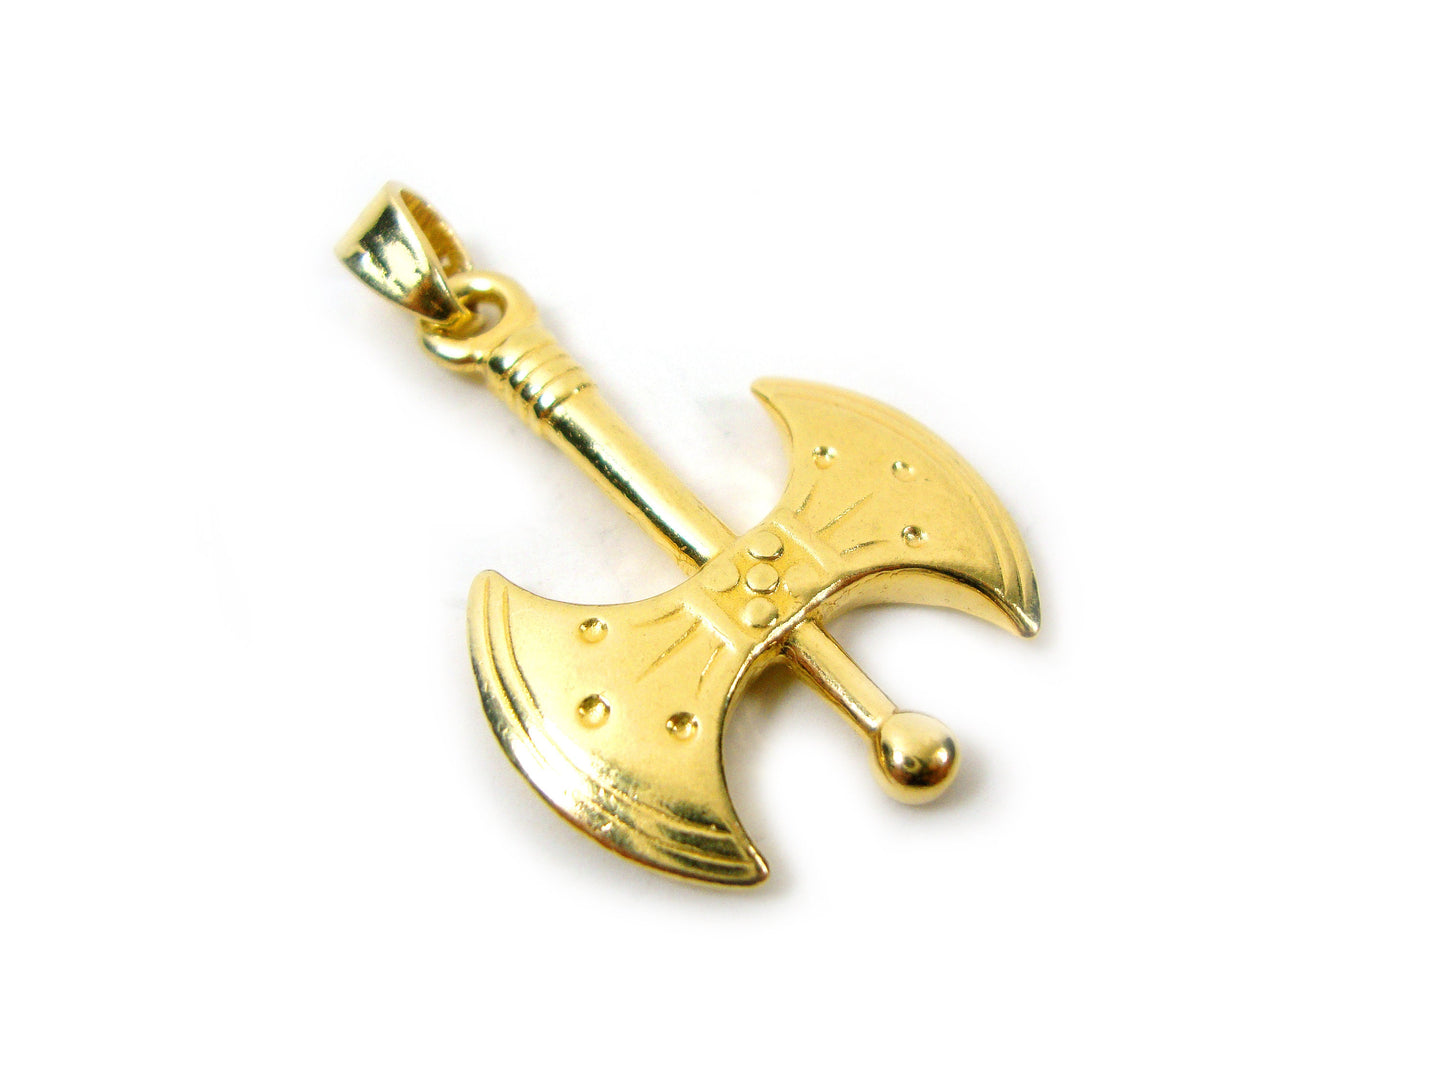 Gold-plated Sterling Silver Ancient Greek Minoan Double Axe Pendant on a White Background